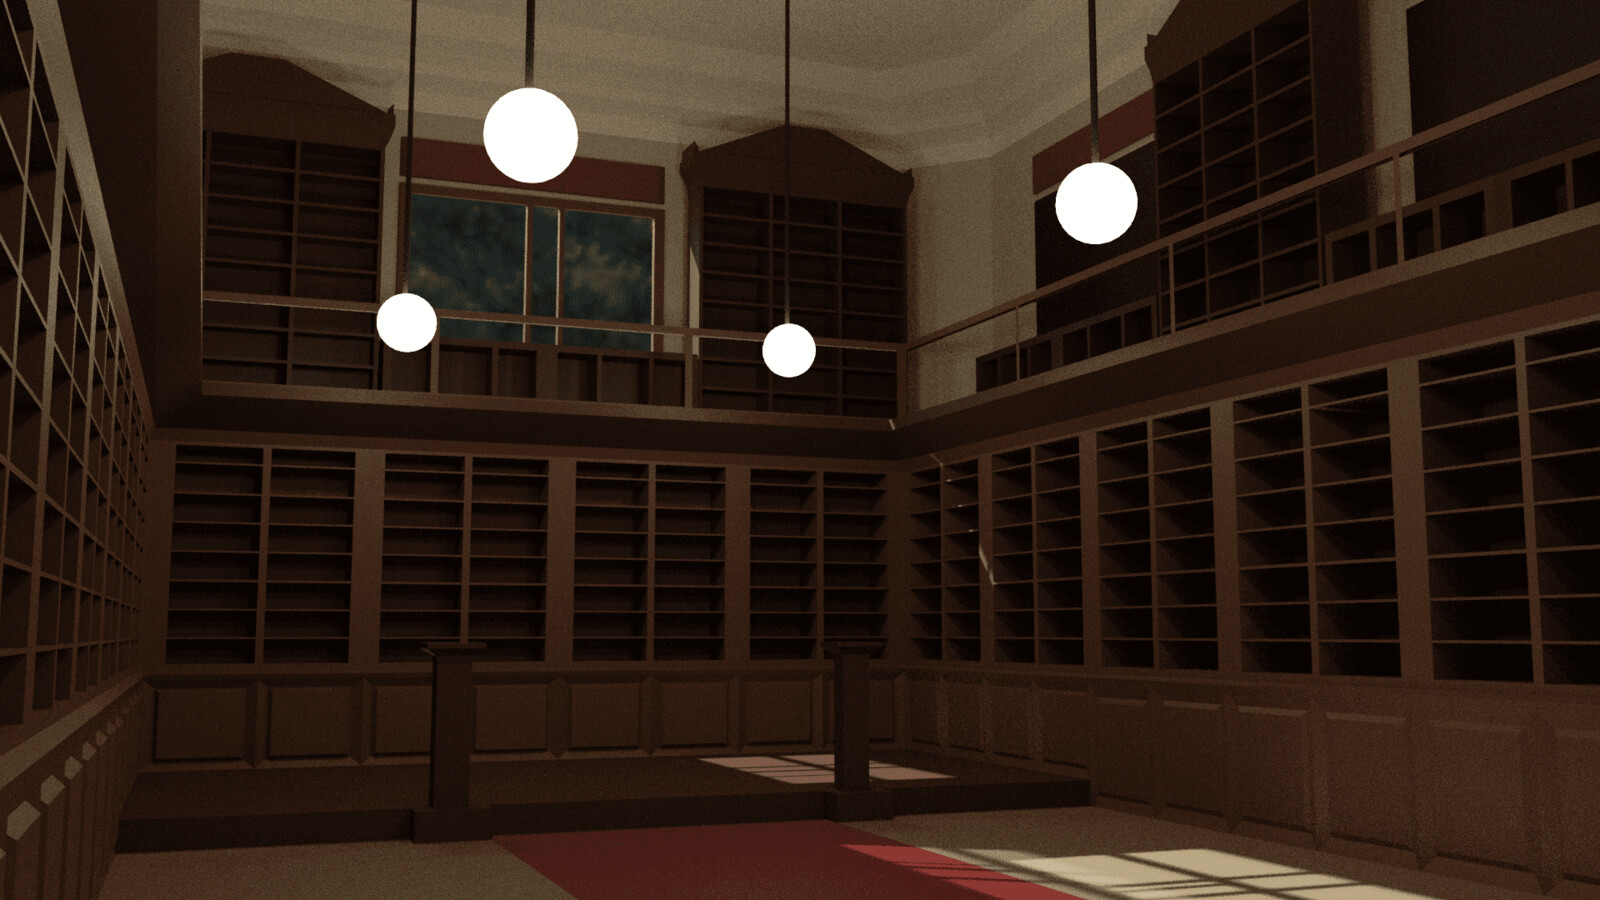 The library (part 1)